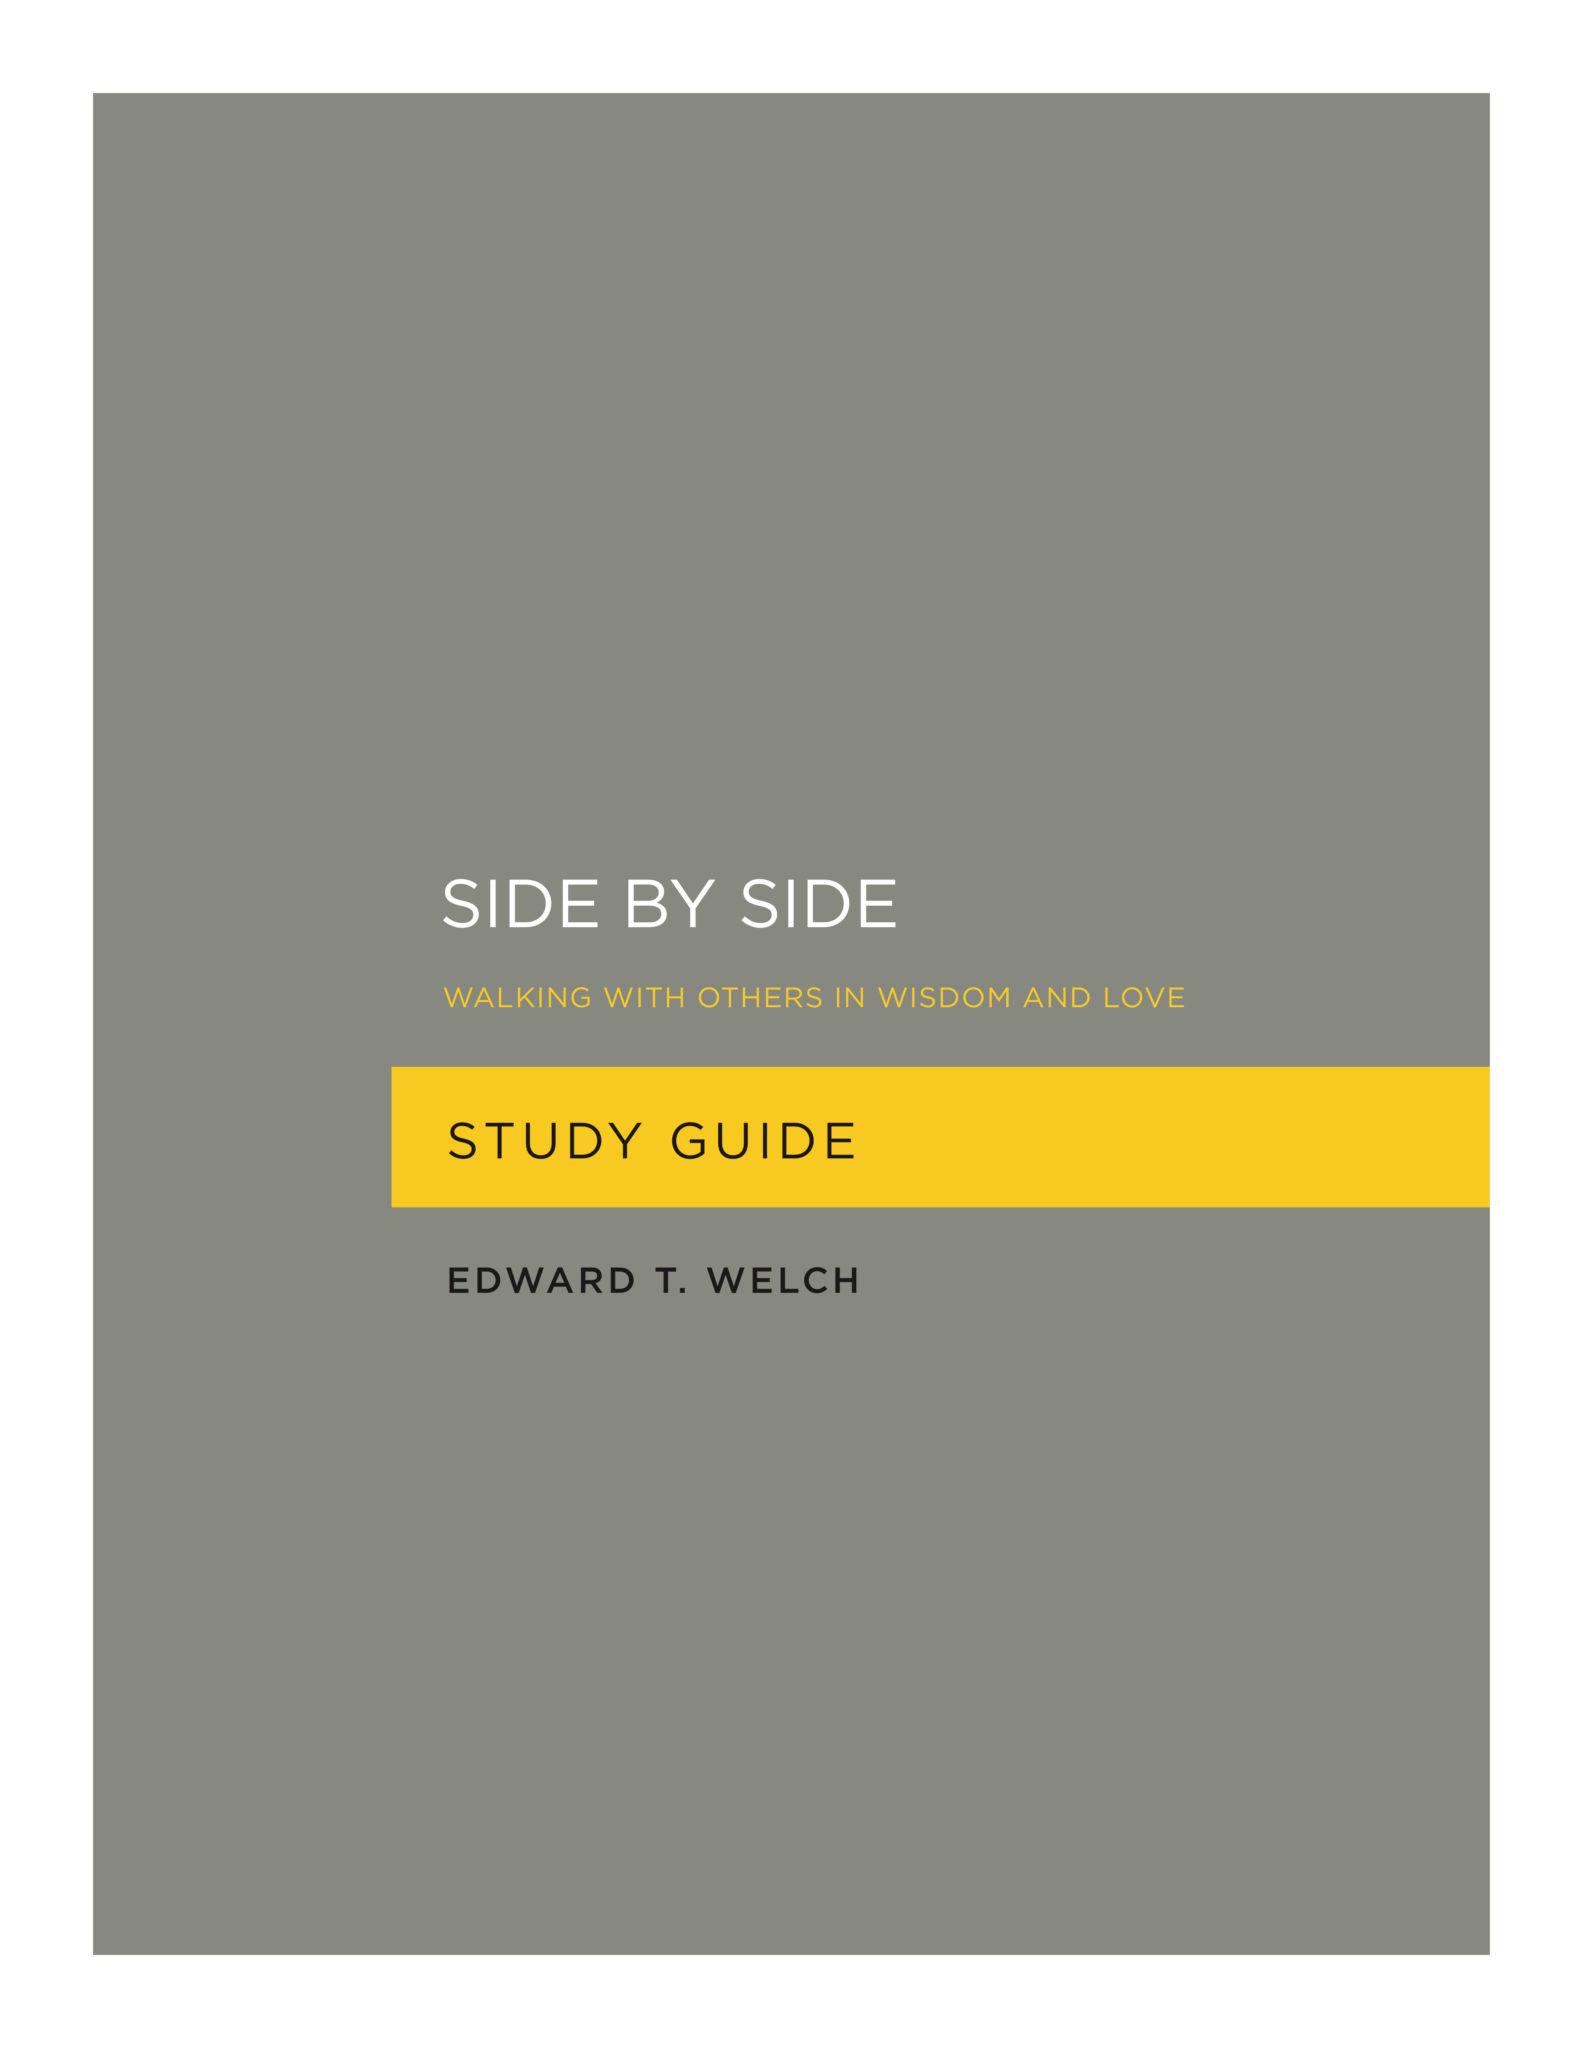 Book cover for Free Side by Side Study and Leader’s Guide